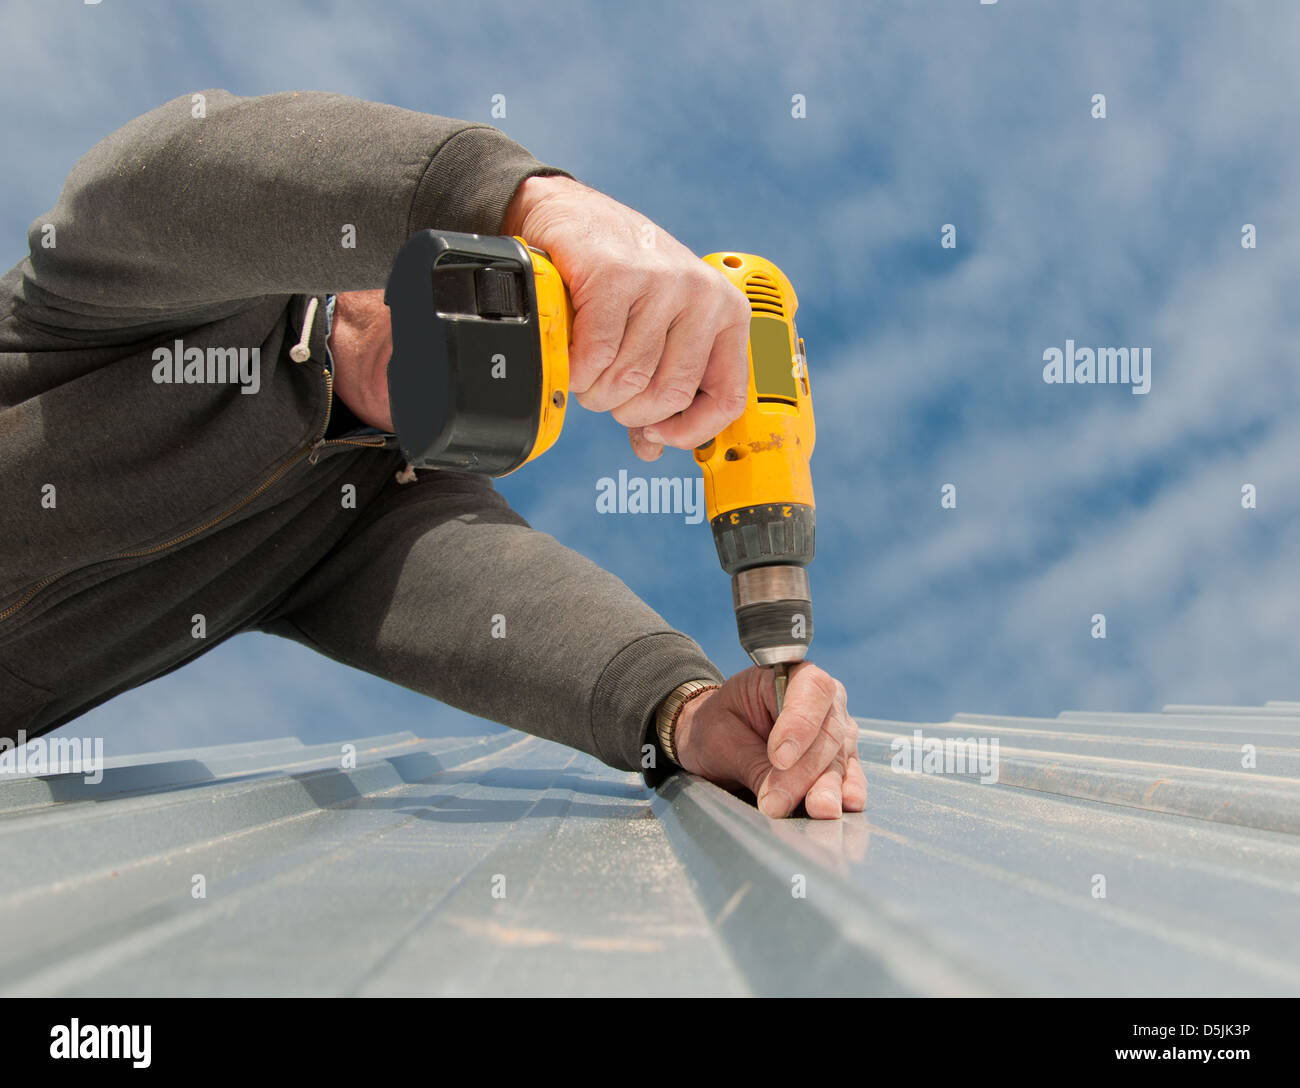 Man using an electric drill to fasten down a metal roof, view from below, up against party cloudy sky Stock Photo